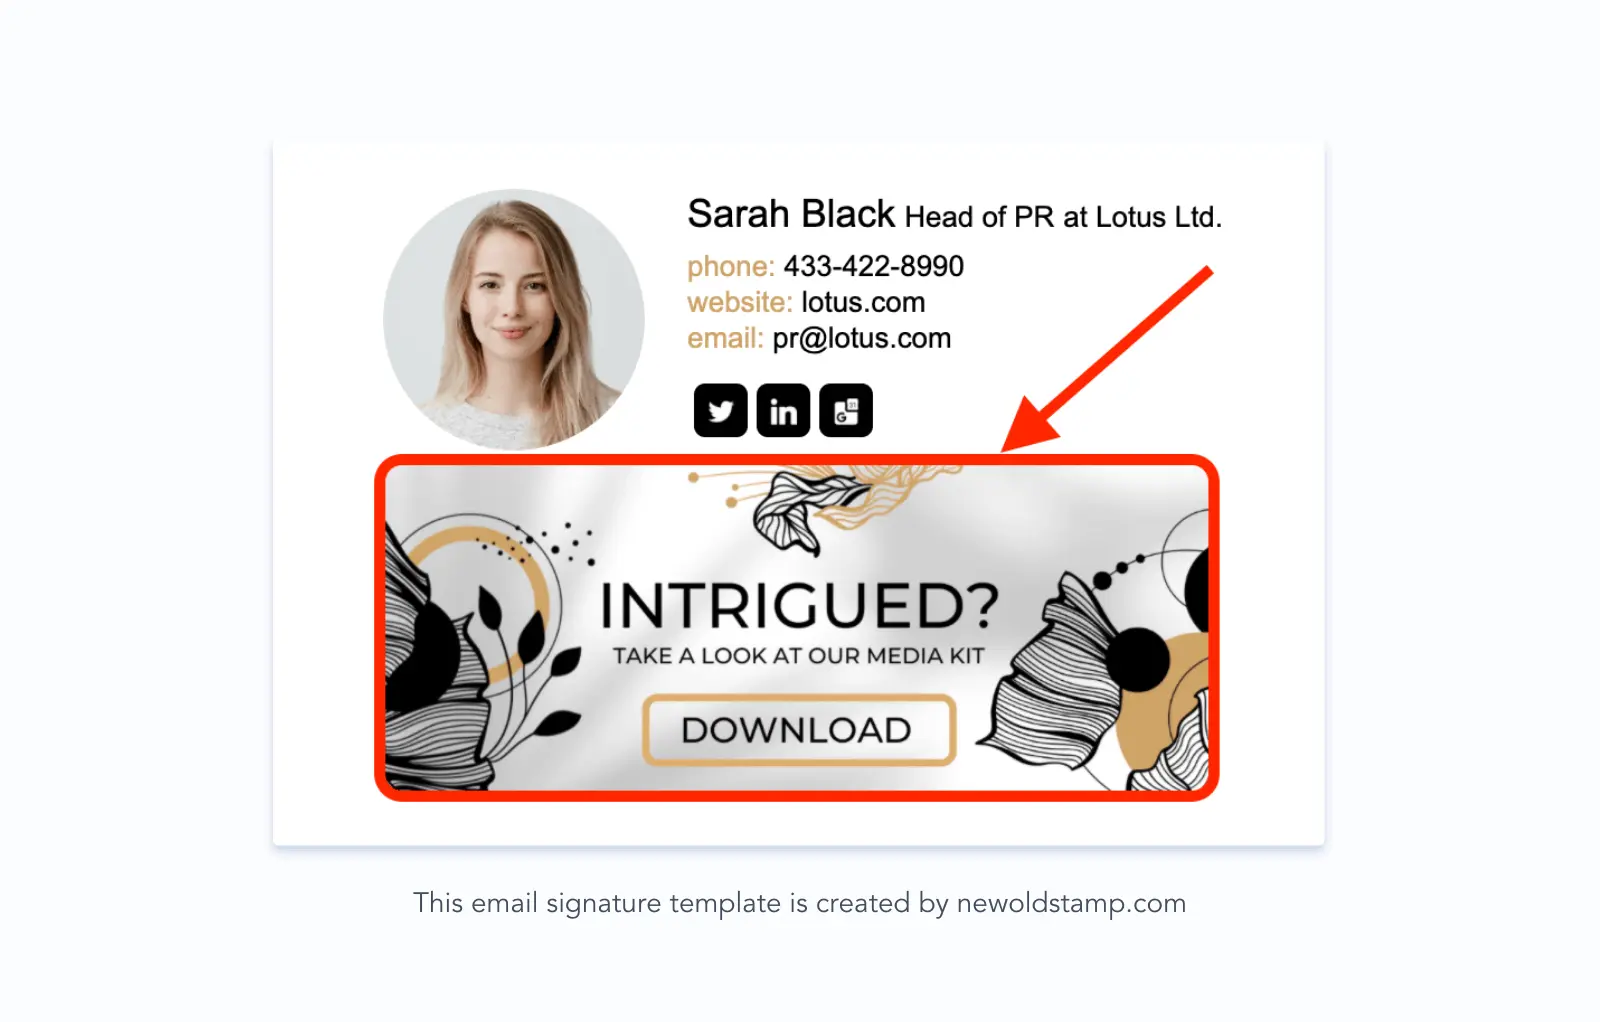 Email signature banner is arguably the most important part